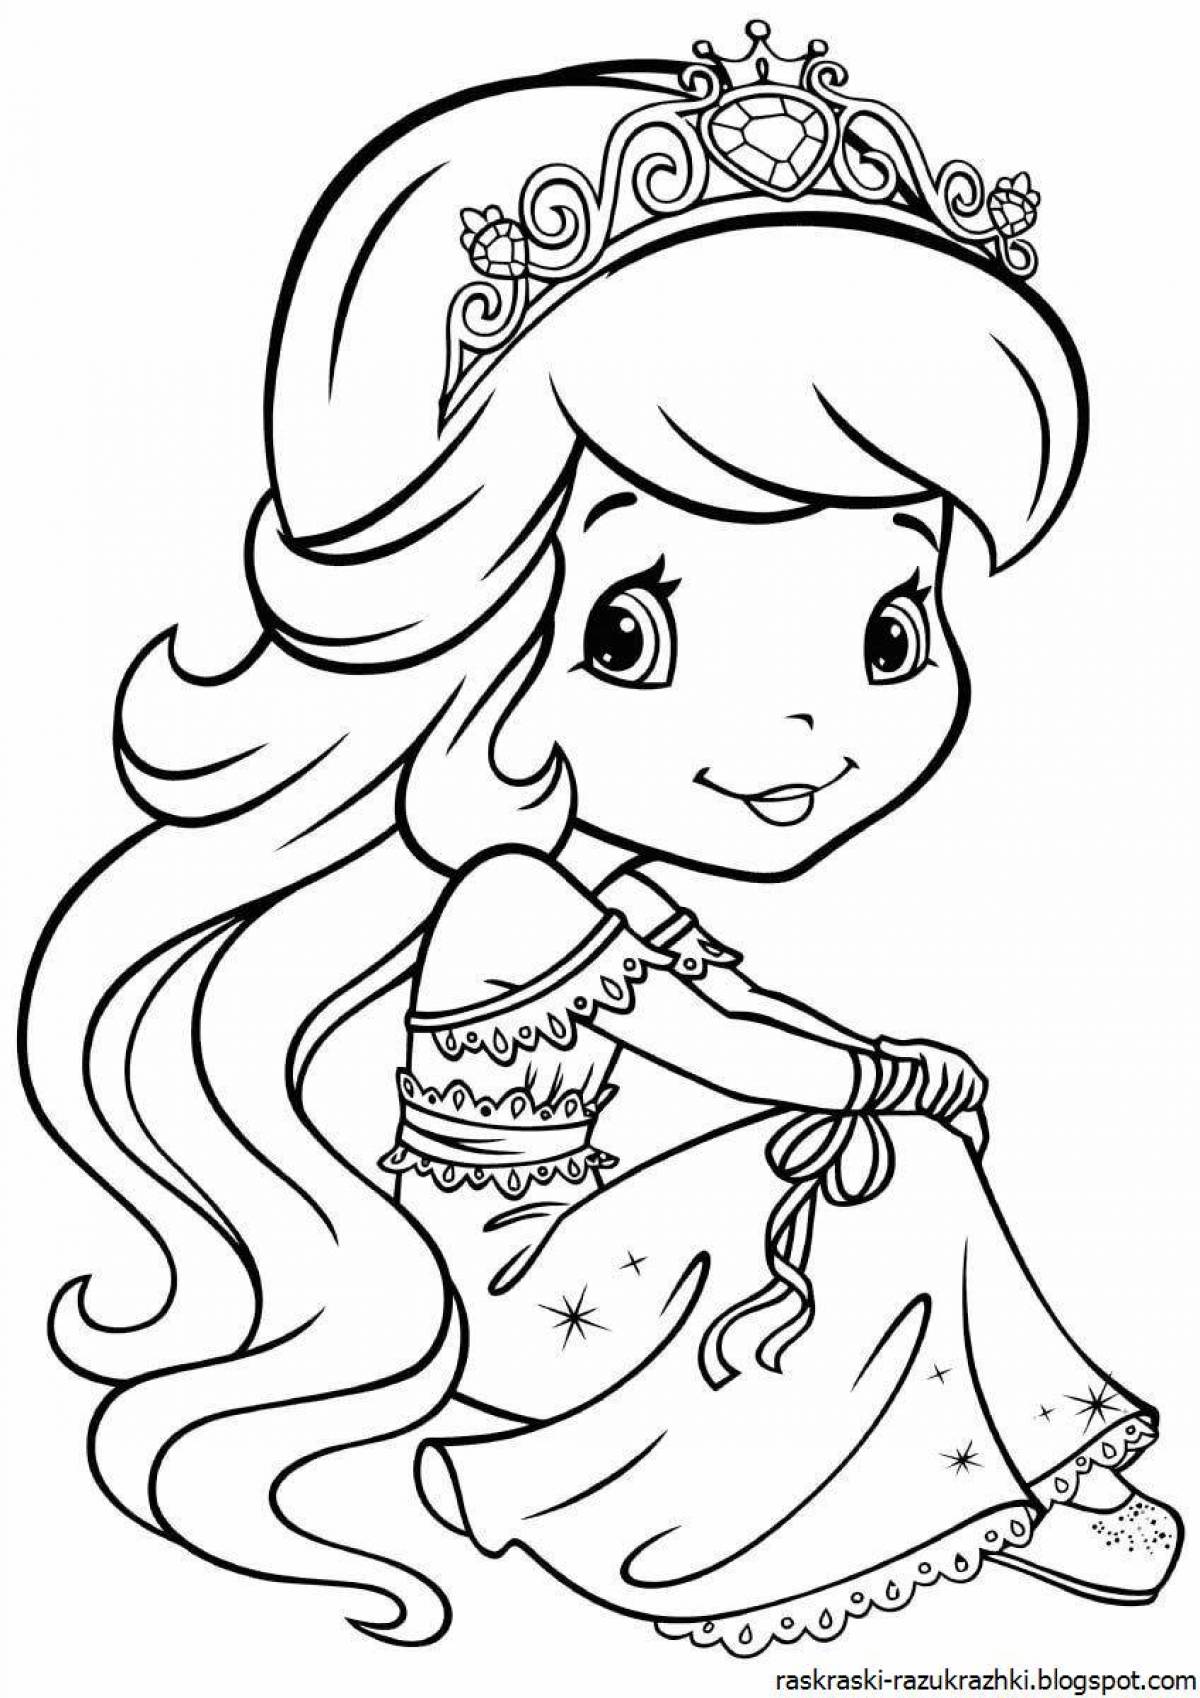 Violent coloring princess for children 3-4 years old